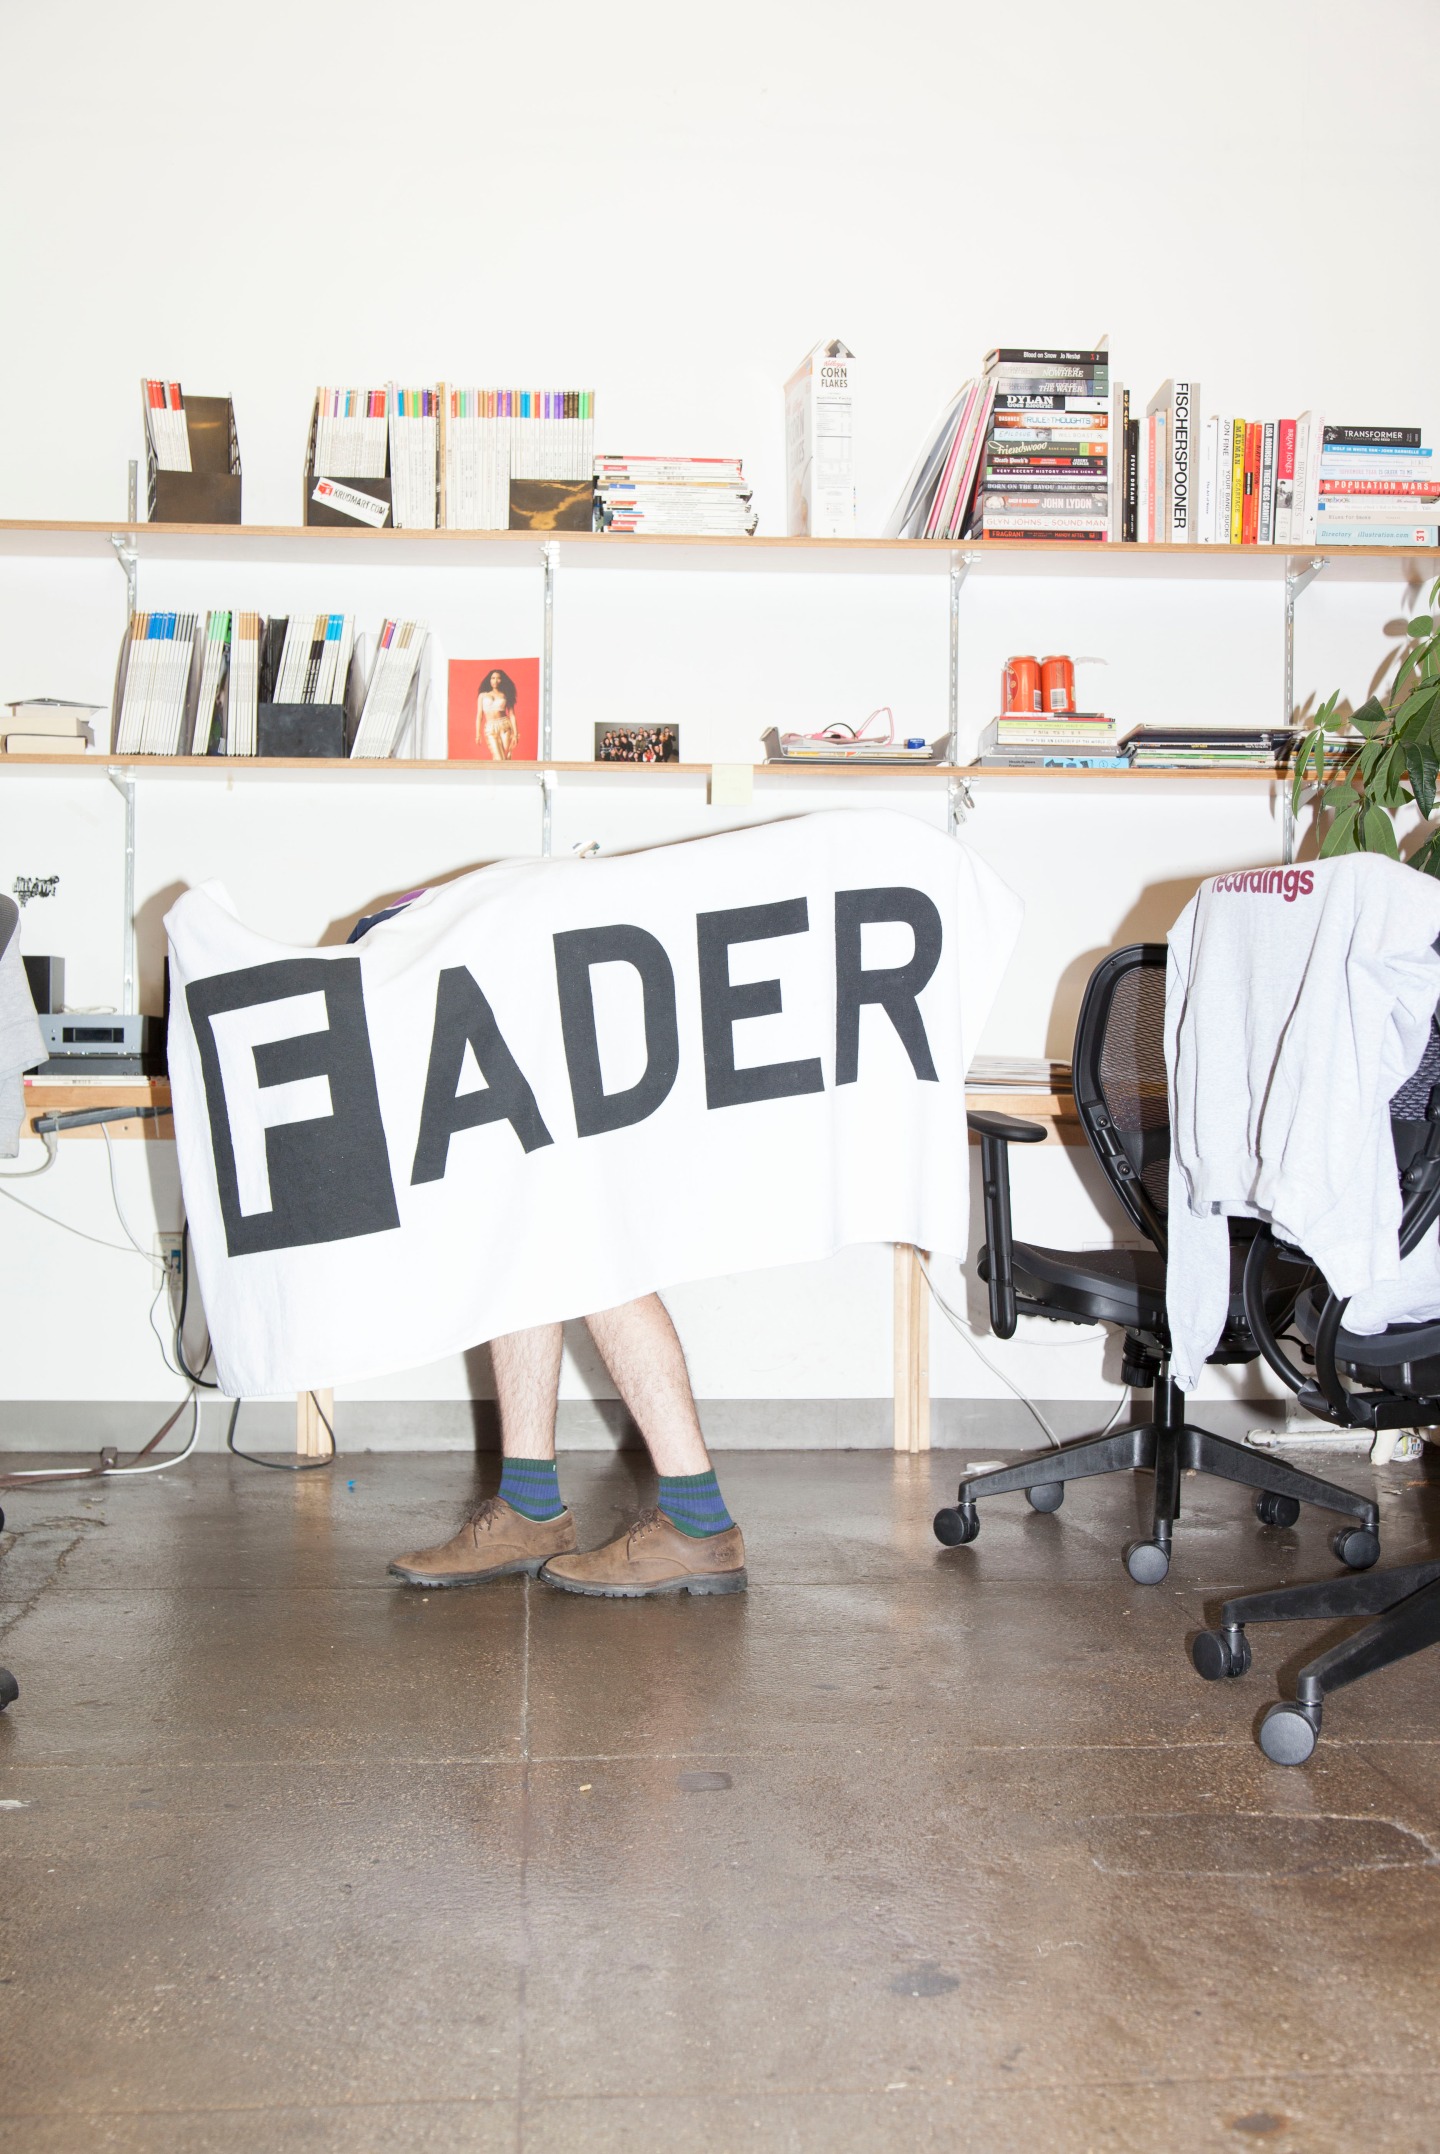 I Trust You: The Oral History Of The FADER